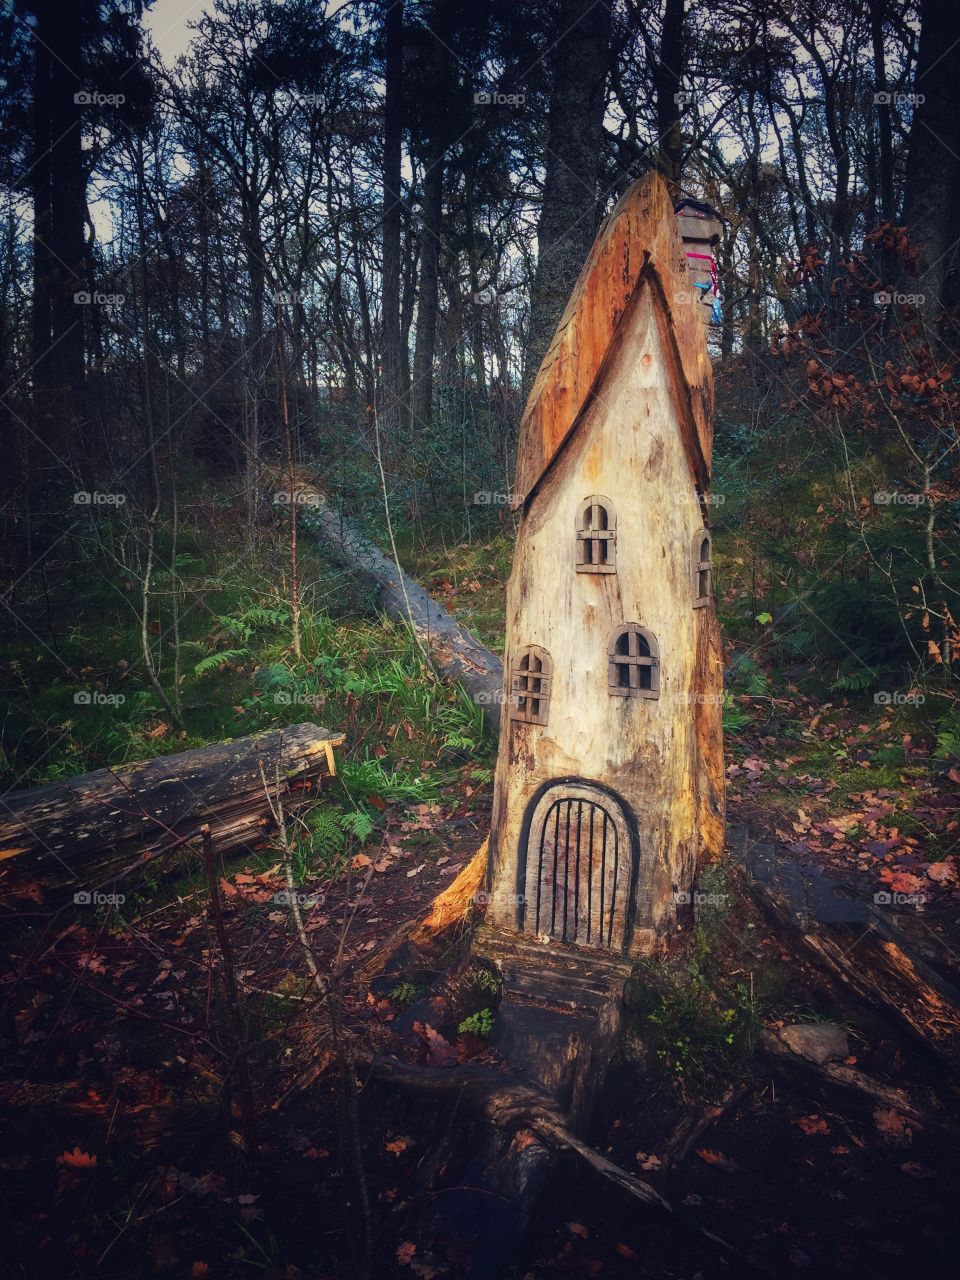 A fairy house in the forest. 